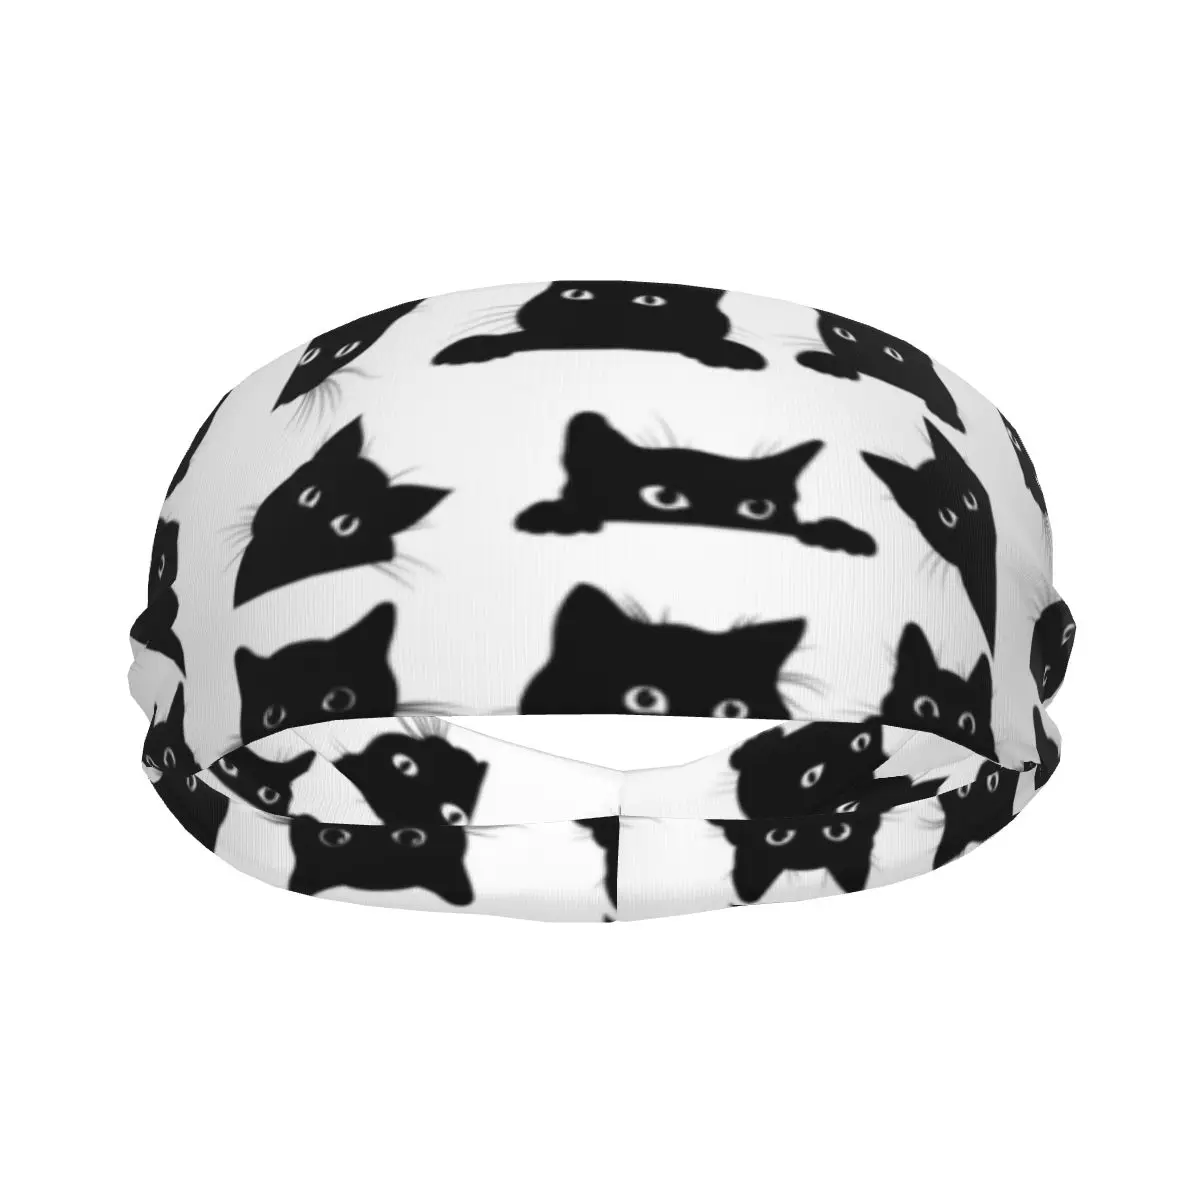 

Sports Headband Black Cats Looking Out Of The Corner Running Fitness Sweatband Absorbent Cycling Jog Hair Bandage